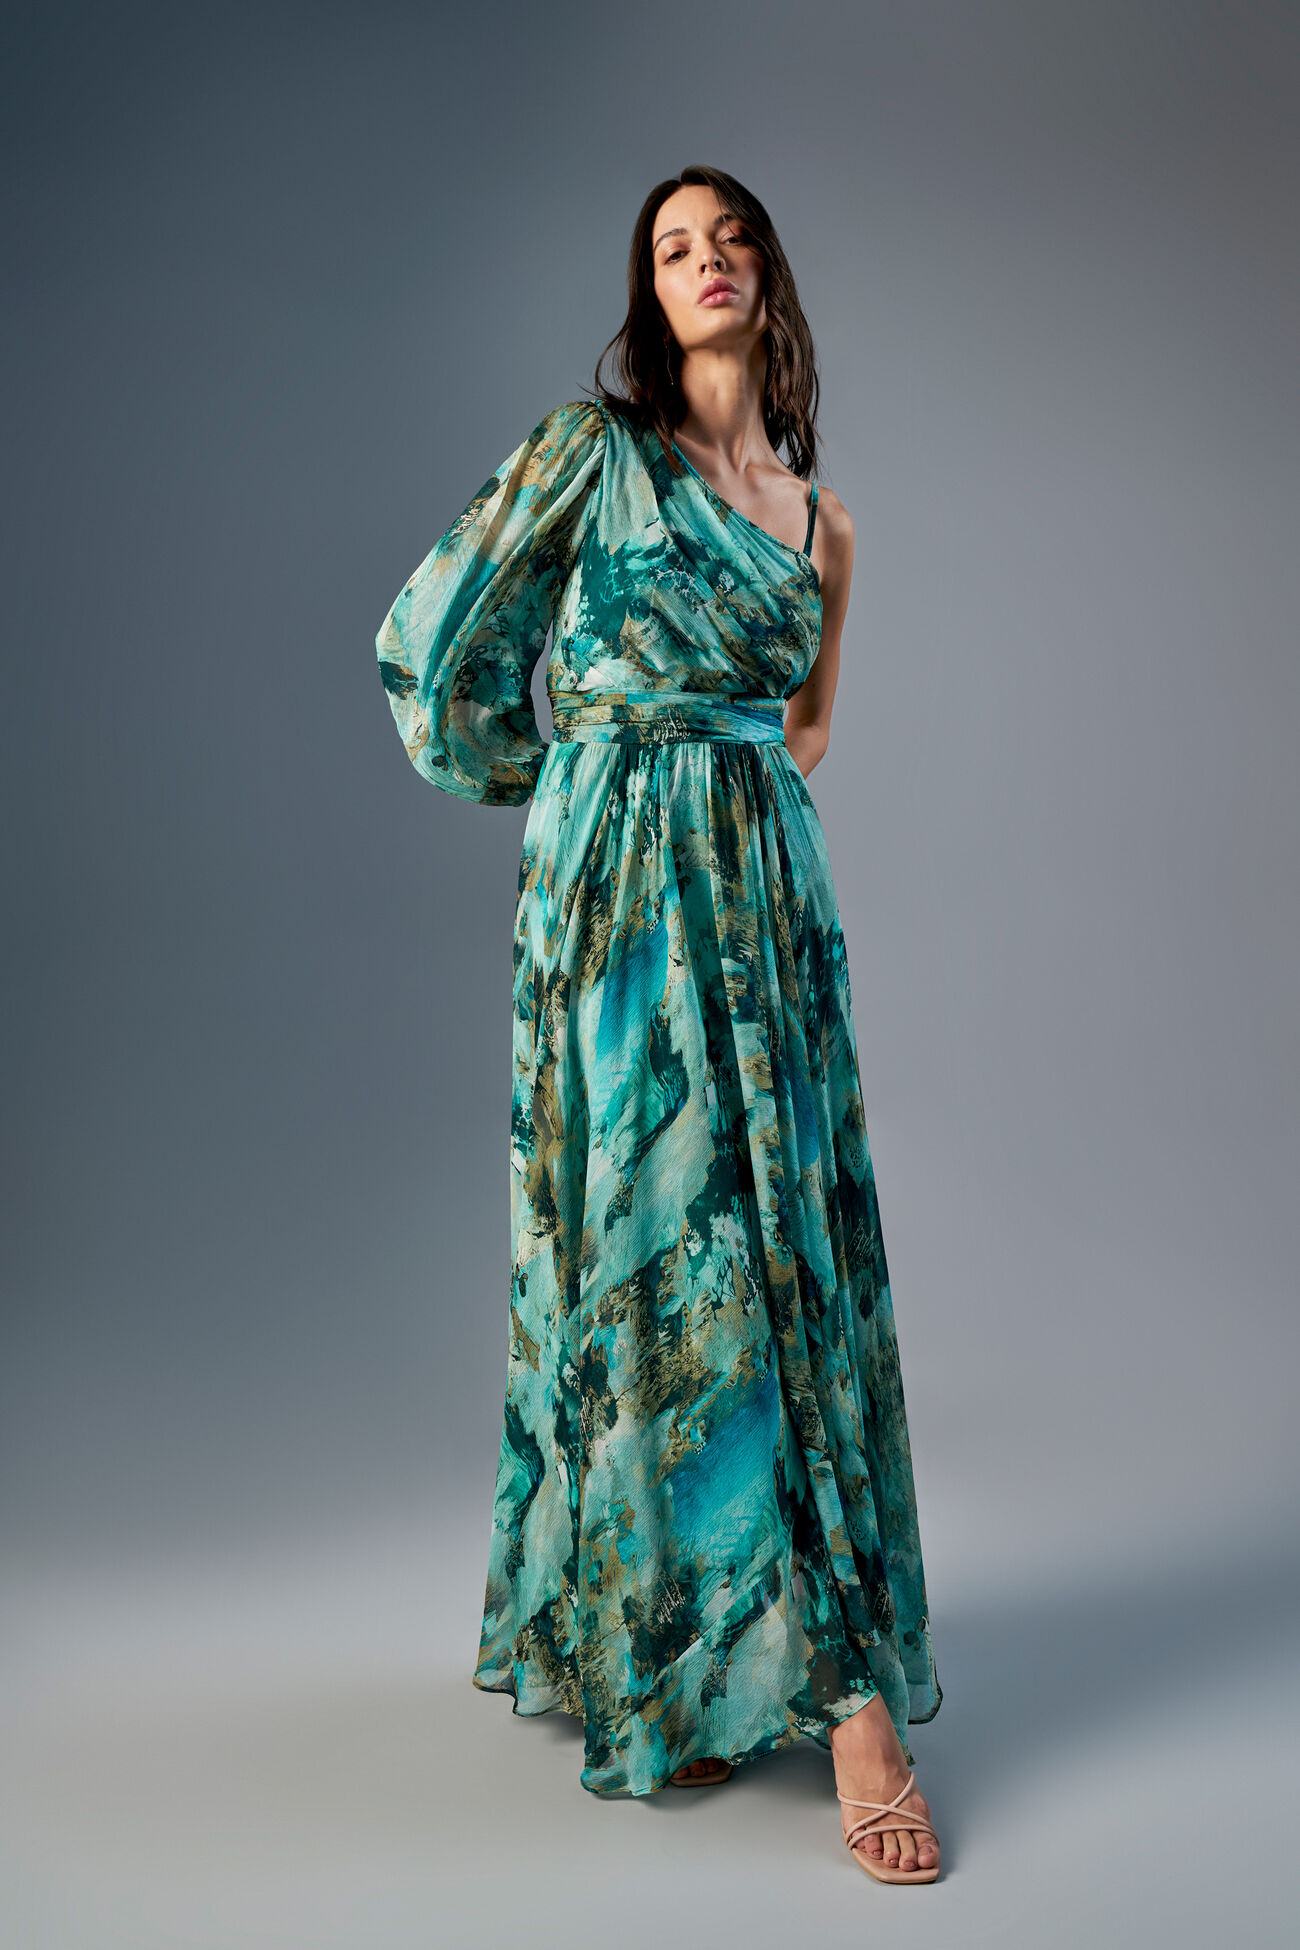 Bree-easy Maxi Dress, Turquoise, image 3